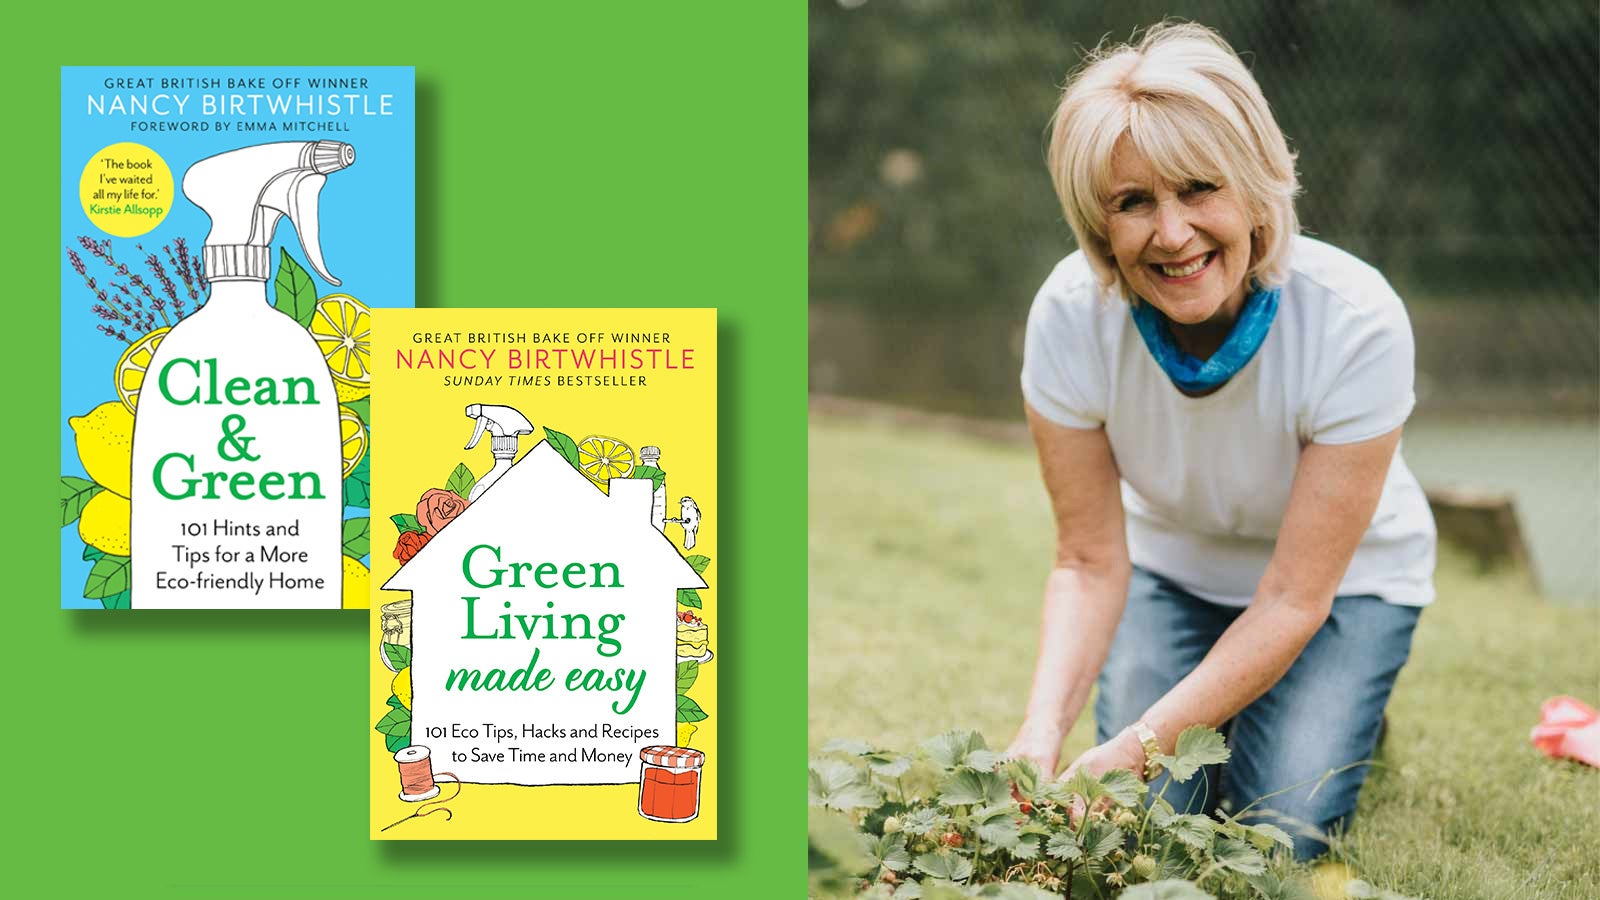 A photo of Nancy Birtwhistle kneeling whilst gardening, next to an image of her books on a green background.